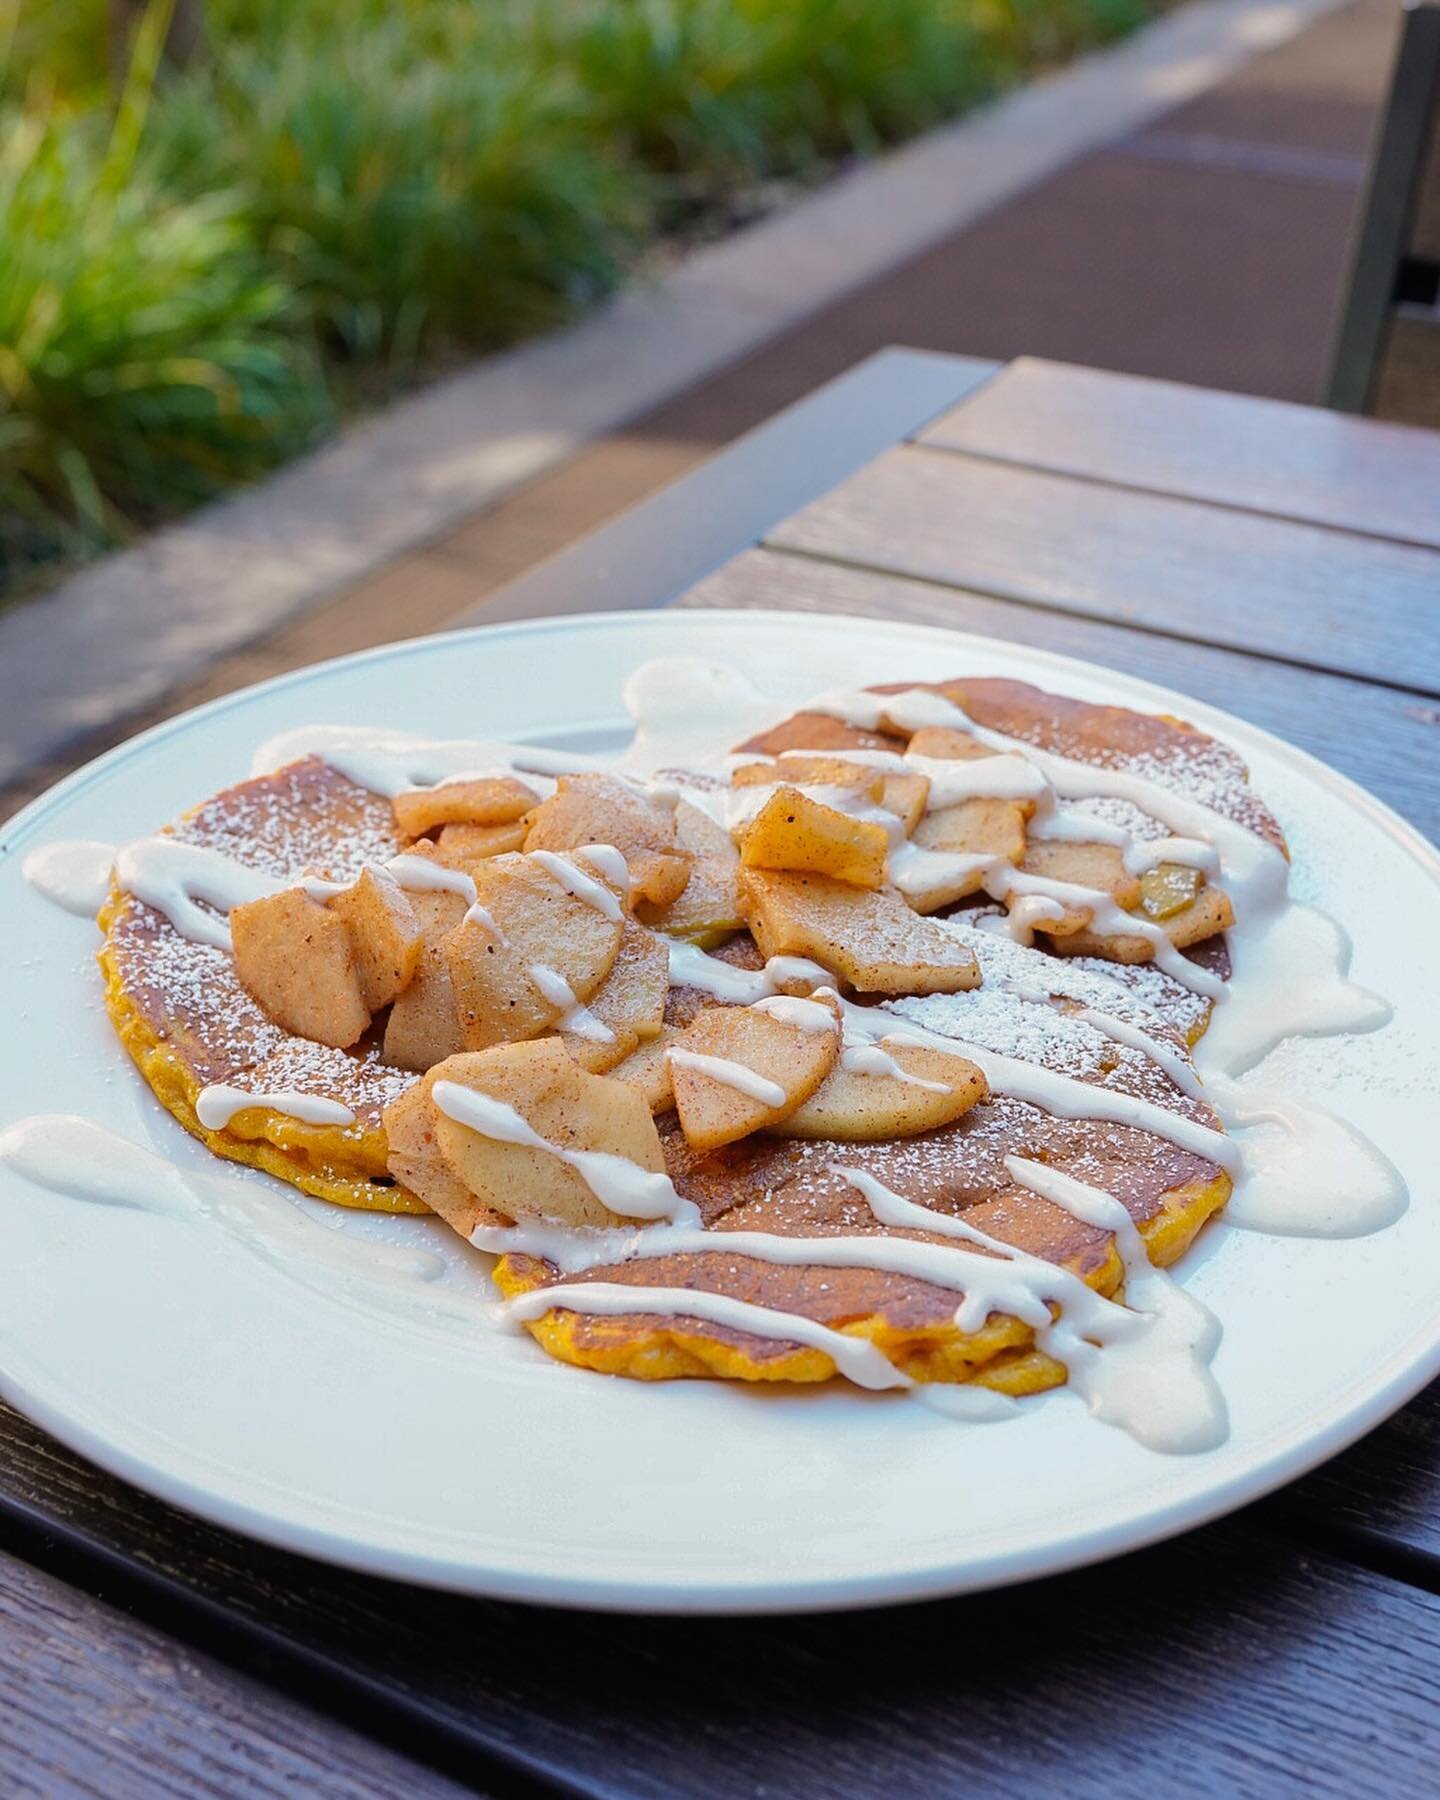 Pumpkin Pancakes + Spiced Apples + Cream Cheese Frosting 🎃🍂 Available on our breakfast specials for a limited time!